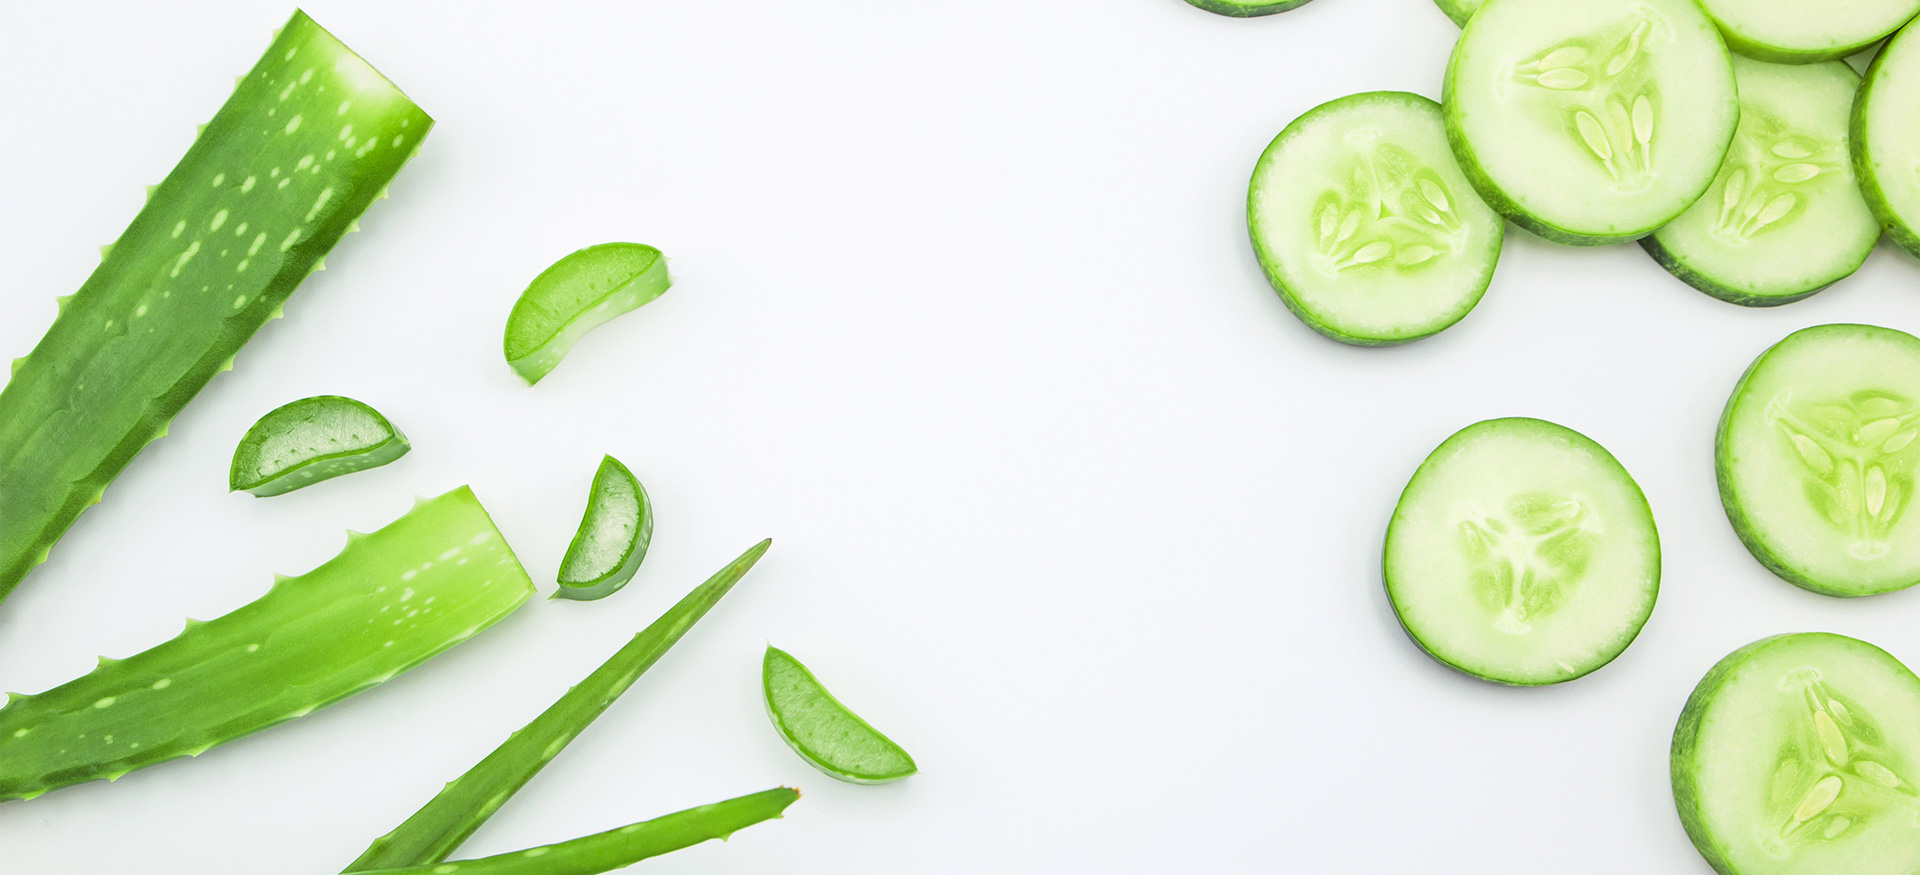 Pamper Your Skin With The Goodness Of Aloe Vera & Cucumber For A Natural Glow